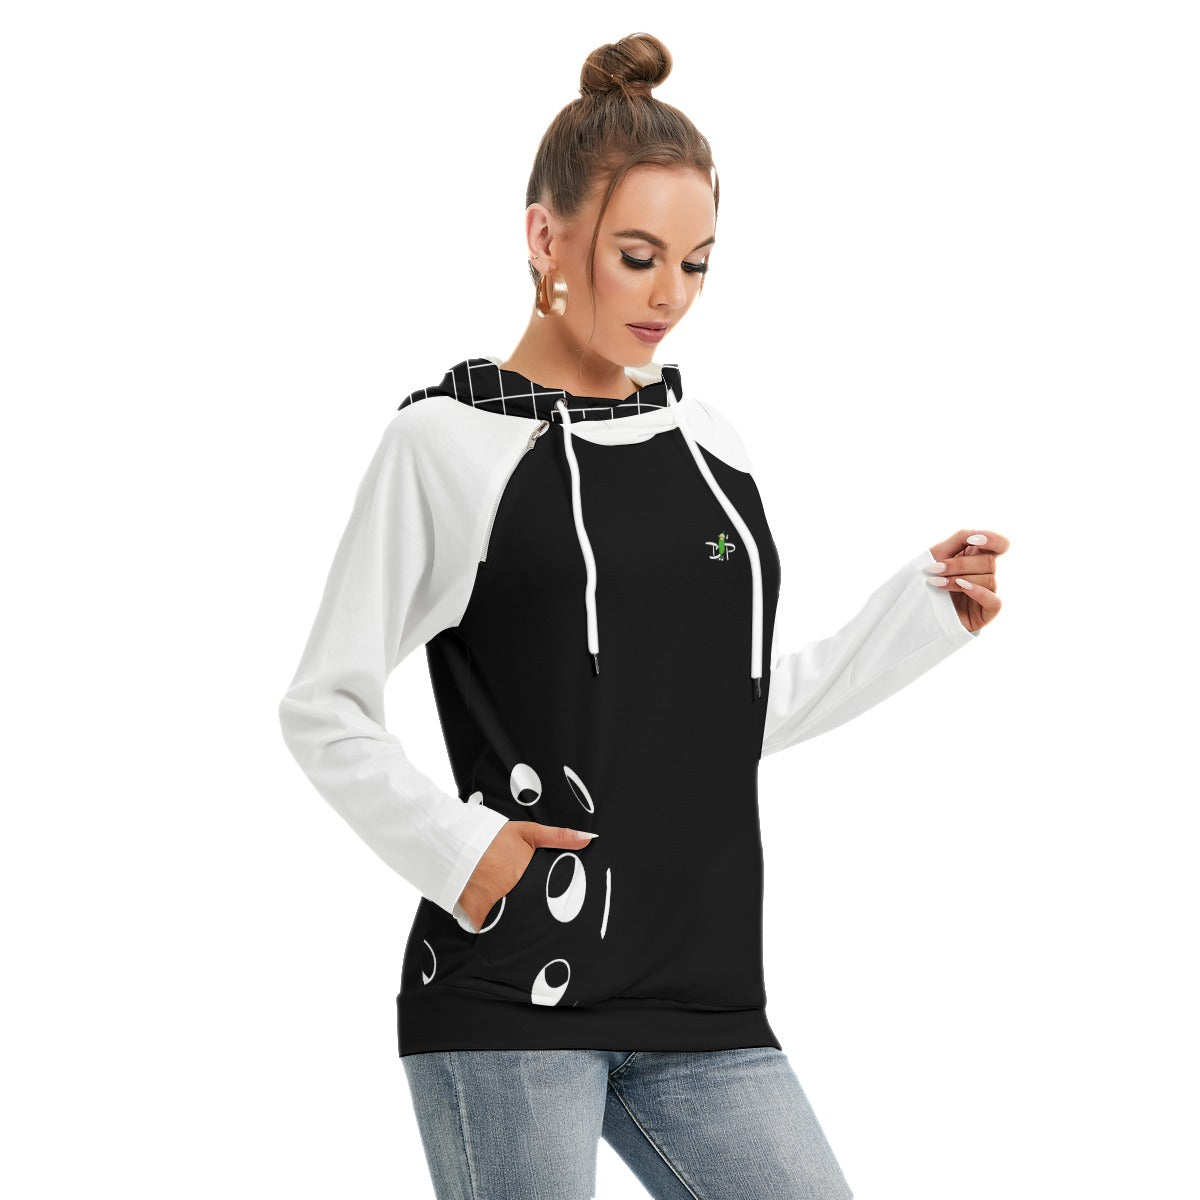 Lisa - Black/White - Ball - Double Hat Hoodie by Dizzy Pickle